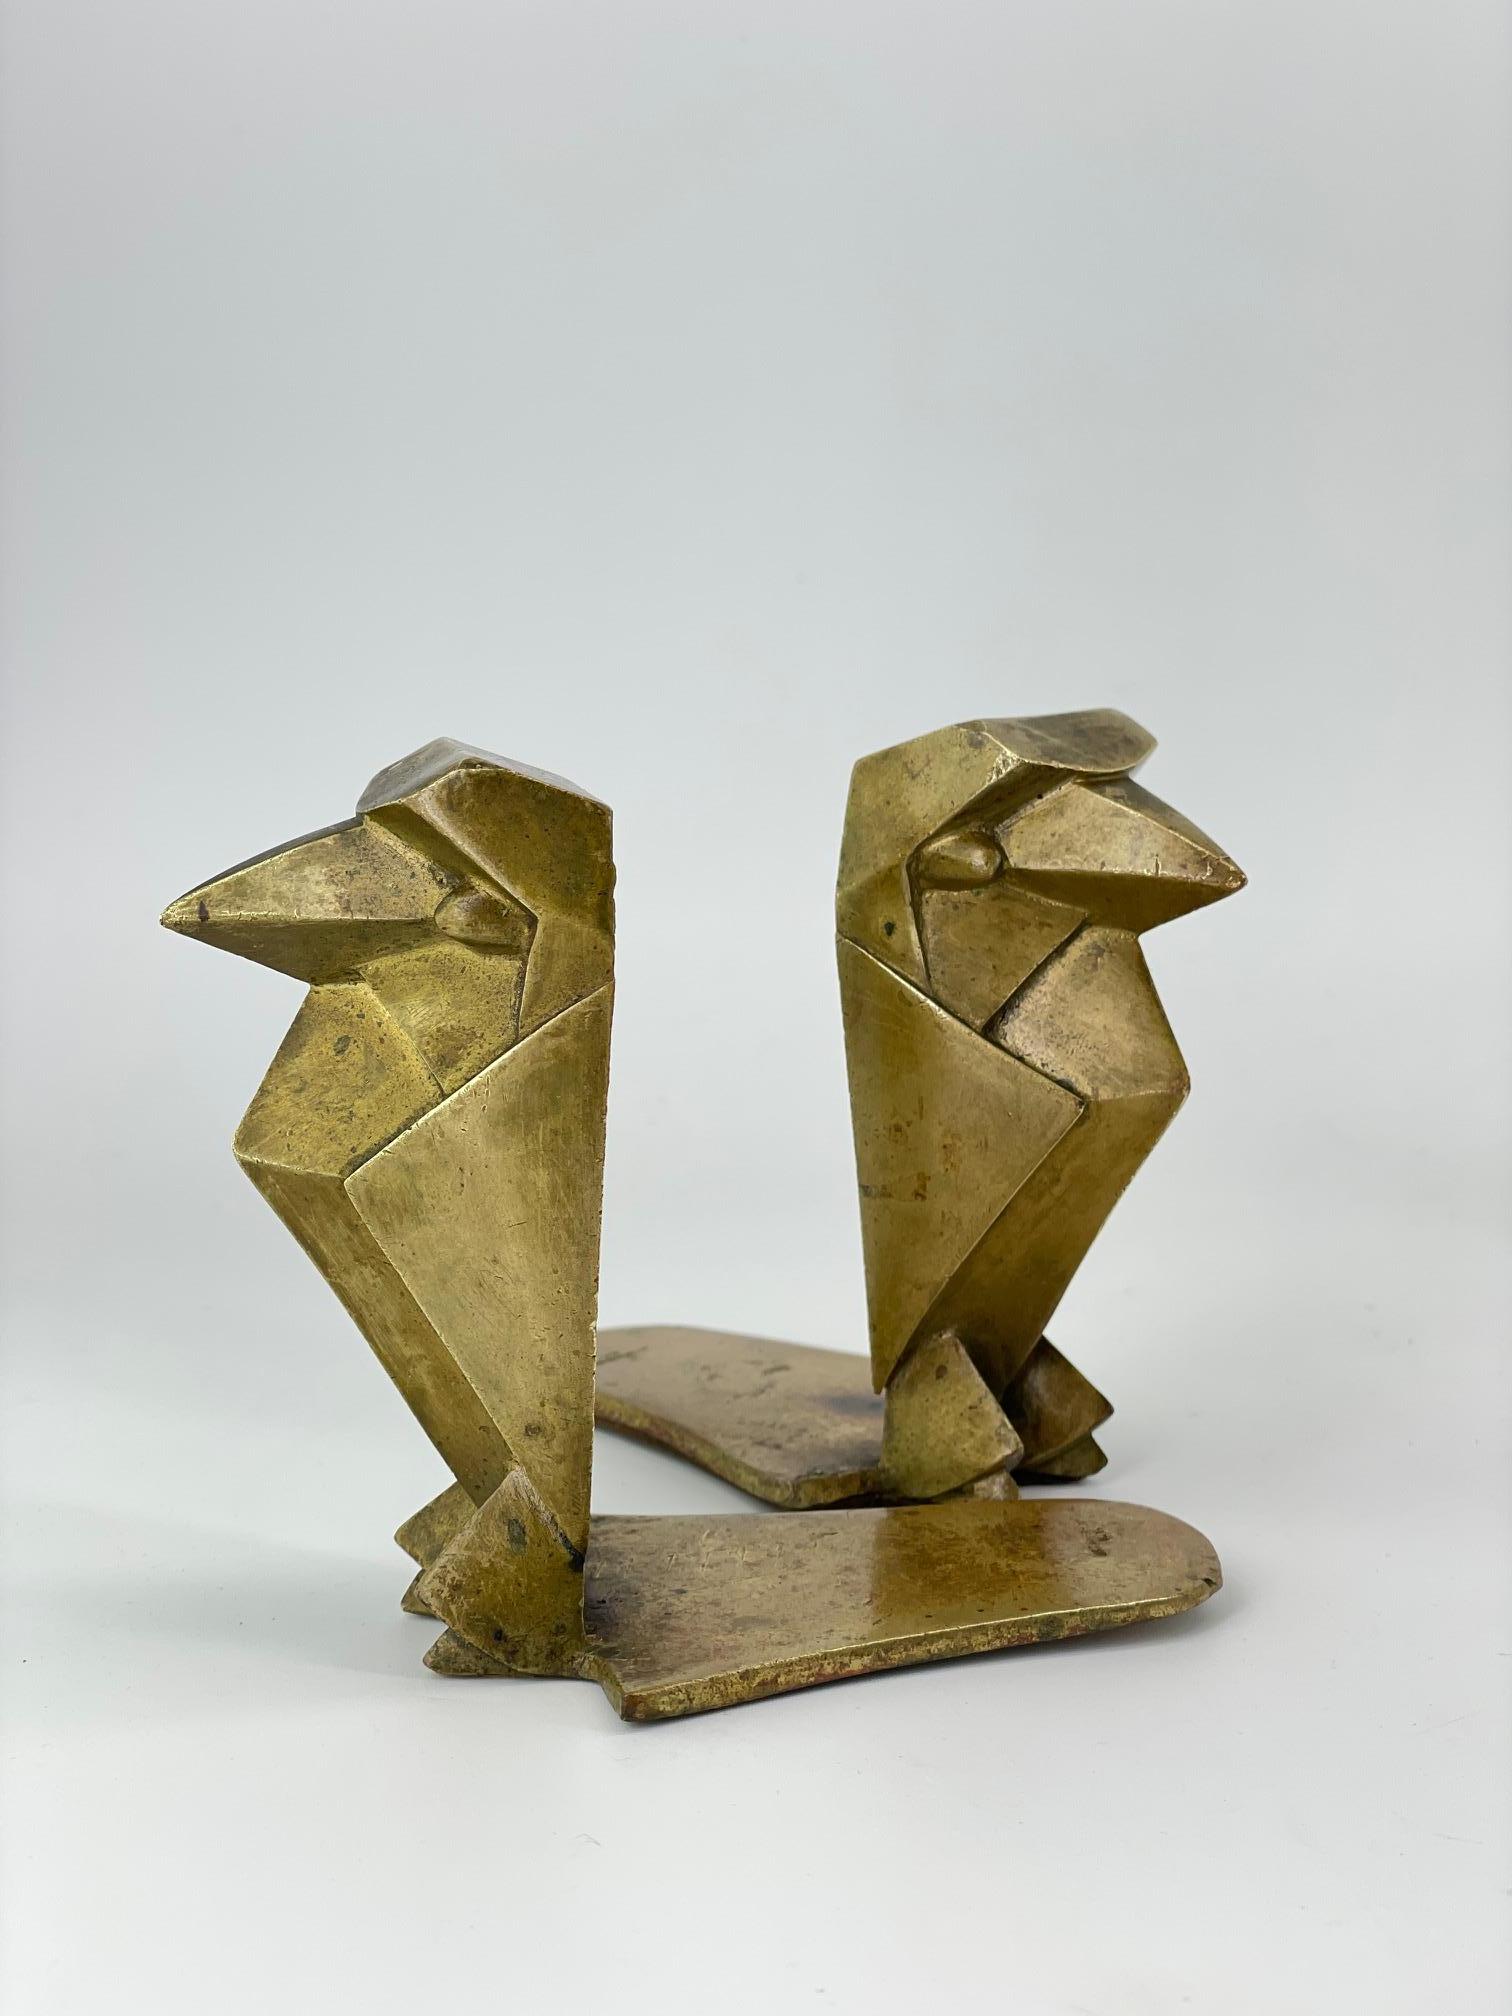 American Art Deco Architectural Bird Bookends Art Brass Co NY Geometric Pair Owl Falcon   For Sale